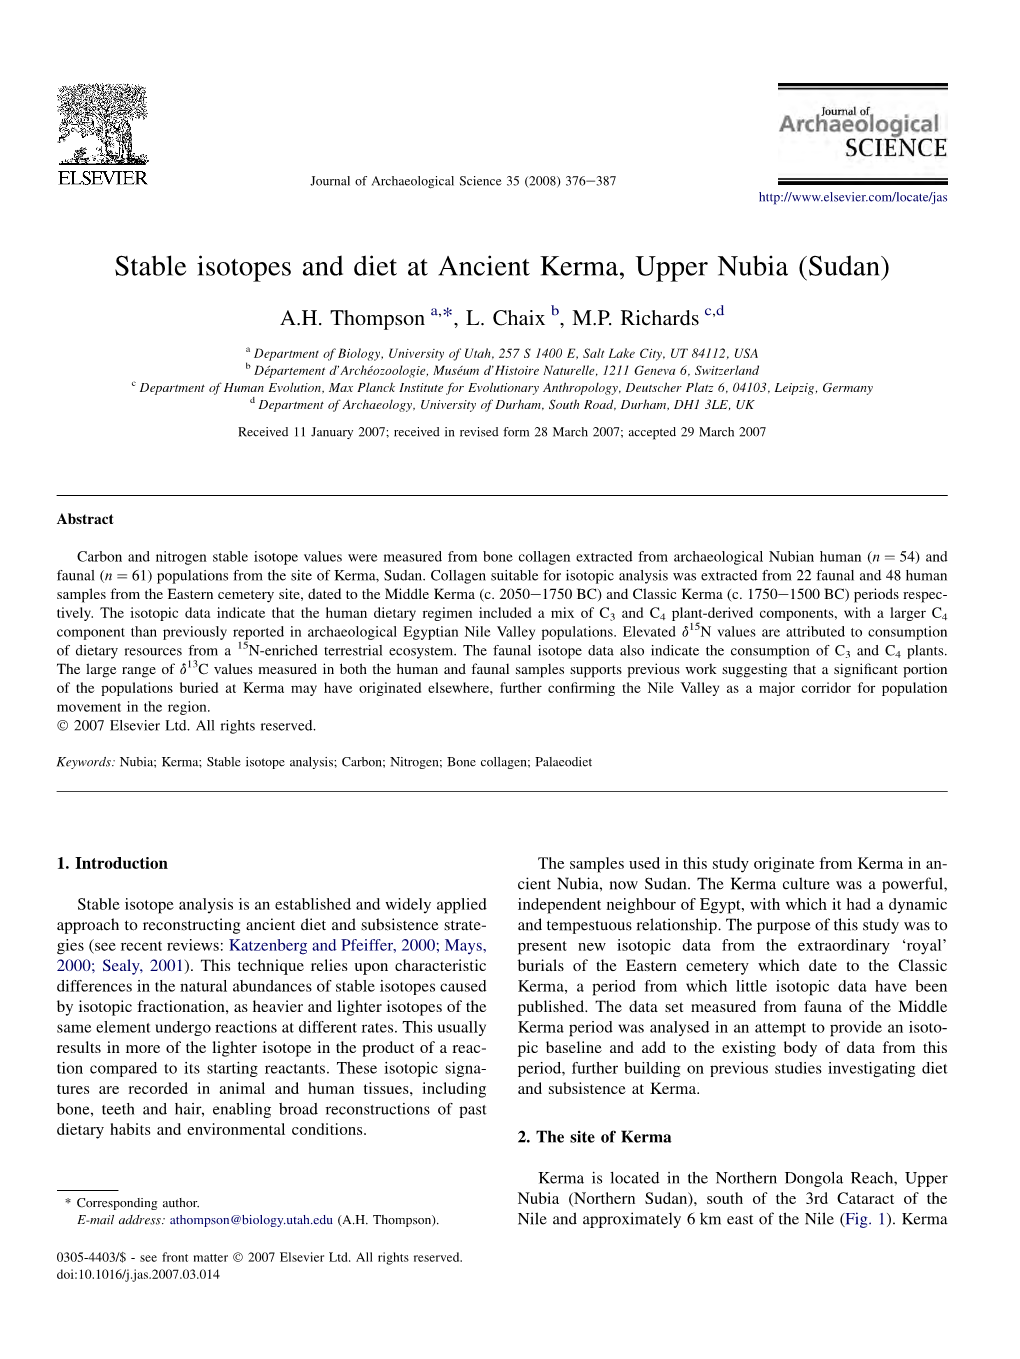 Stable Isotopes and Diet at Ancient Kerma, Upper Nubia (Sudan)